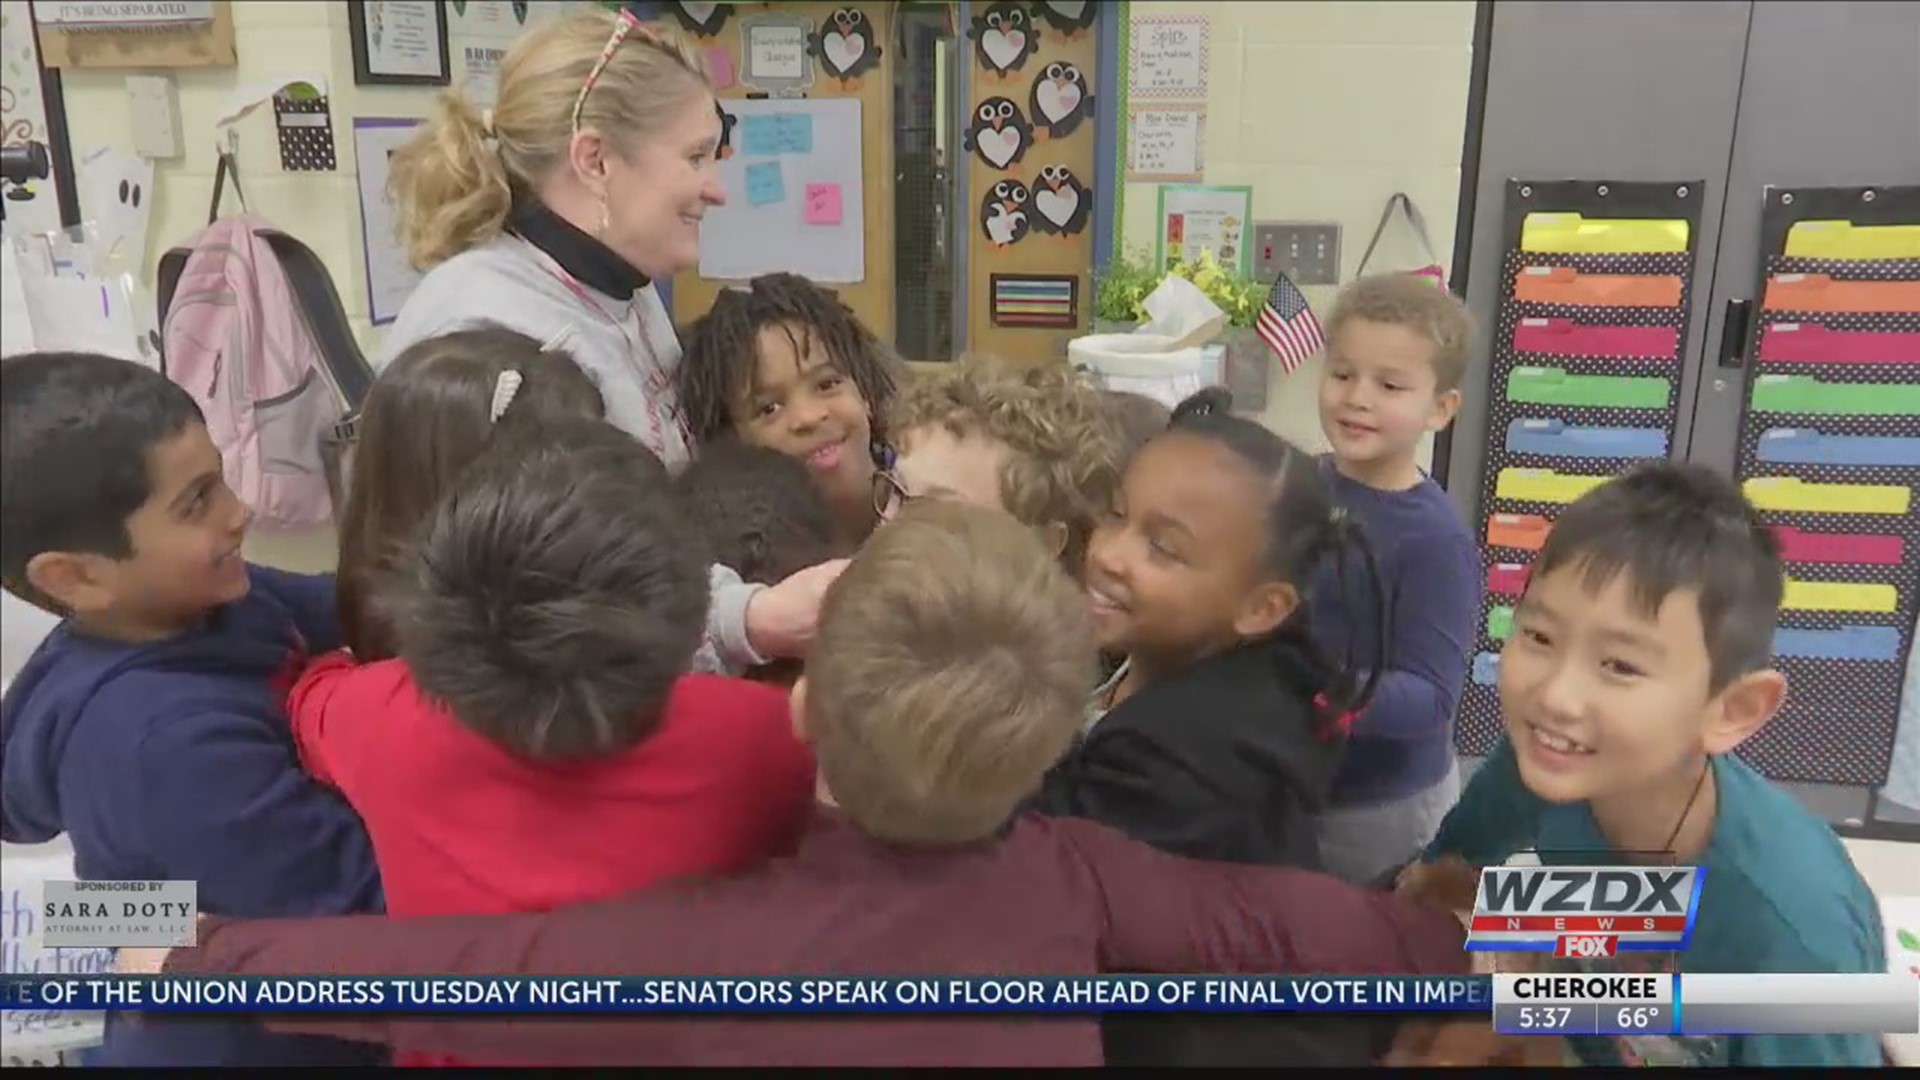 Mrs. Kim Pratt was very surprised to find out she was the Valley's Top Teacher. "They are so sweet," shares Mrs. Pratt. "And of course, I start crying, but they are used to that because I cry when I read books, and we cry for happy things."